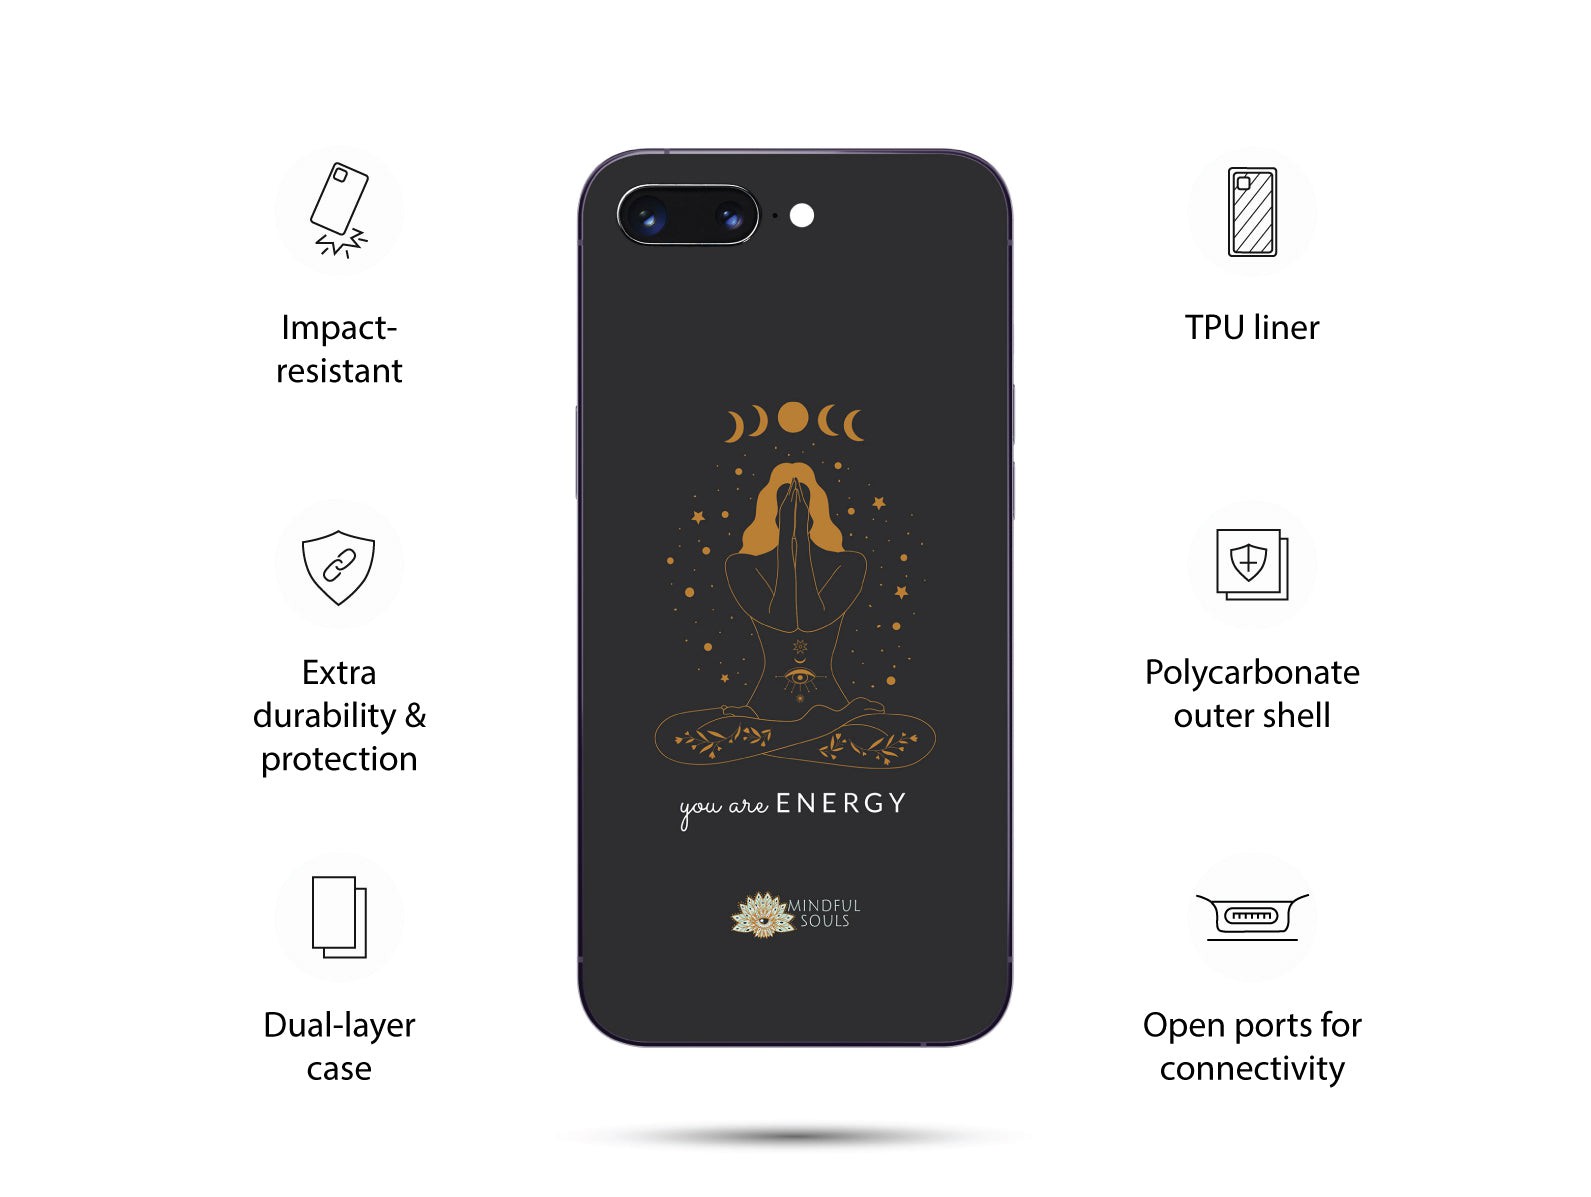 You Are Energy Phone Case